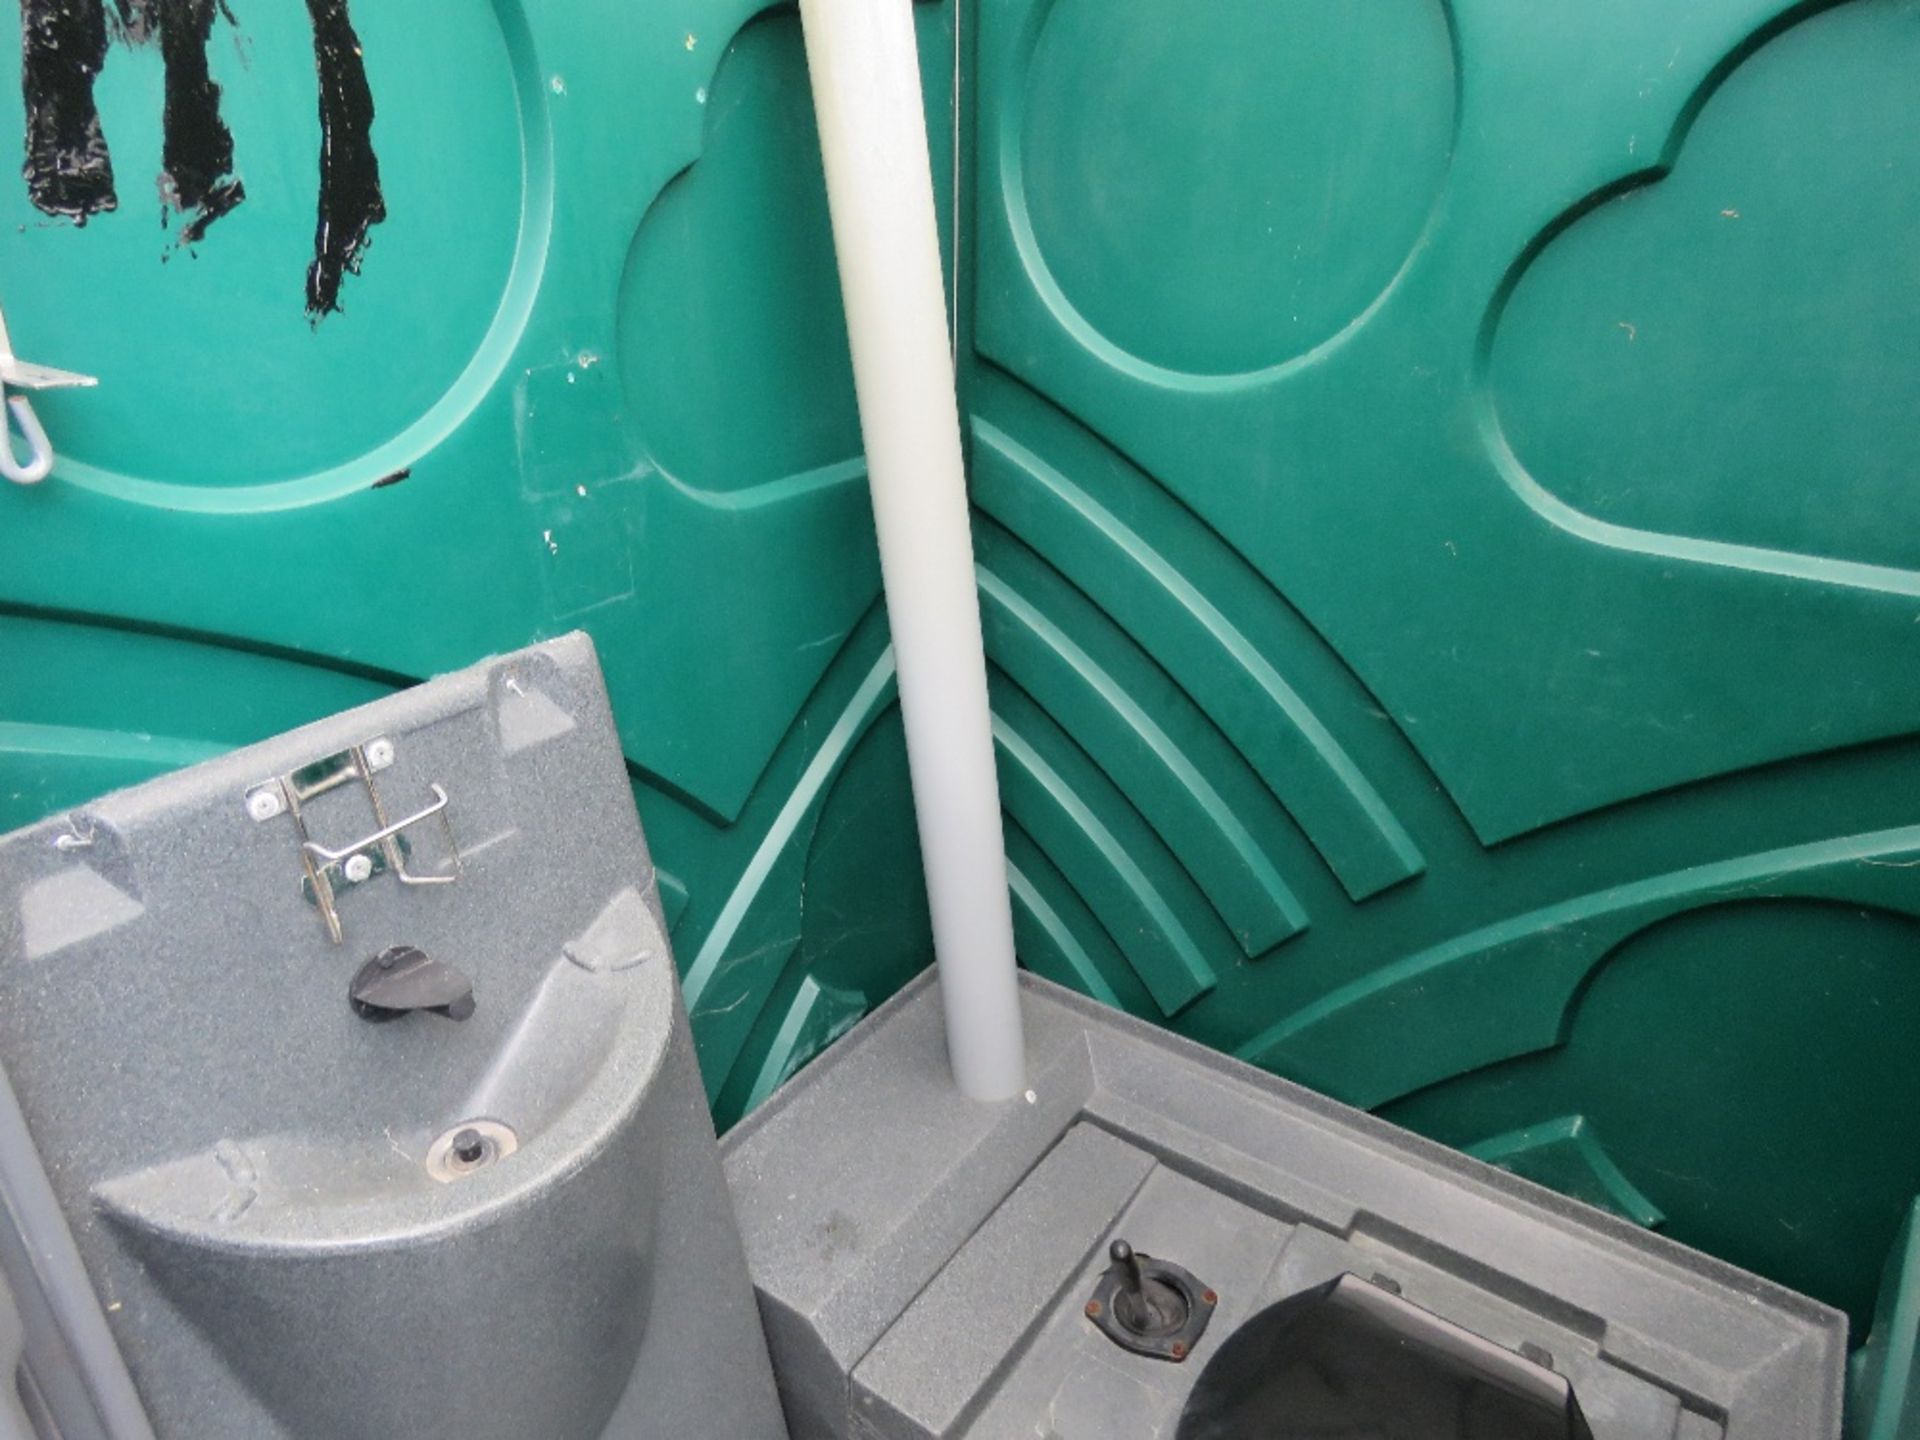 PORTABLE SITE TOILET. DIRECT FROM EVENTS COMPANY. - Image 3 of 4